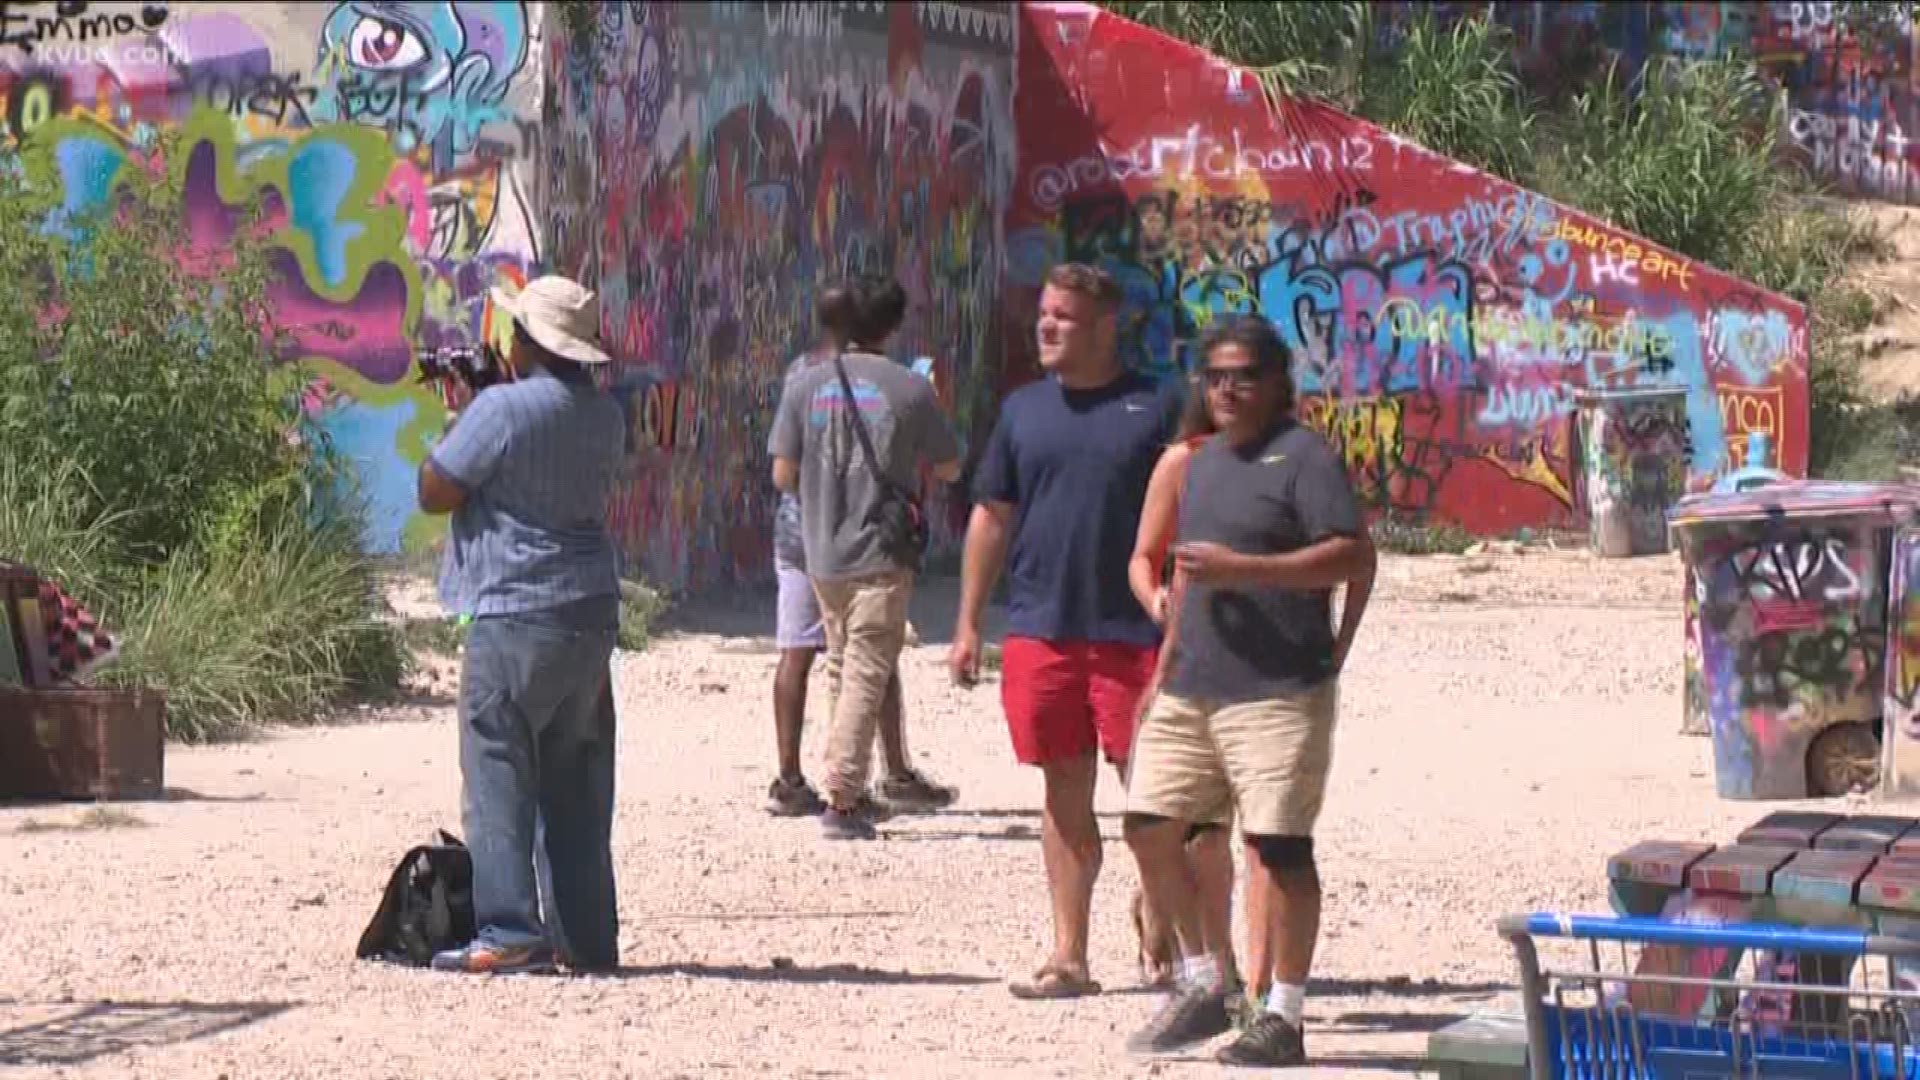 We now know when exactly one of Austin's most popular tourist attractions will shut down.